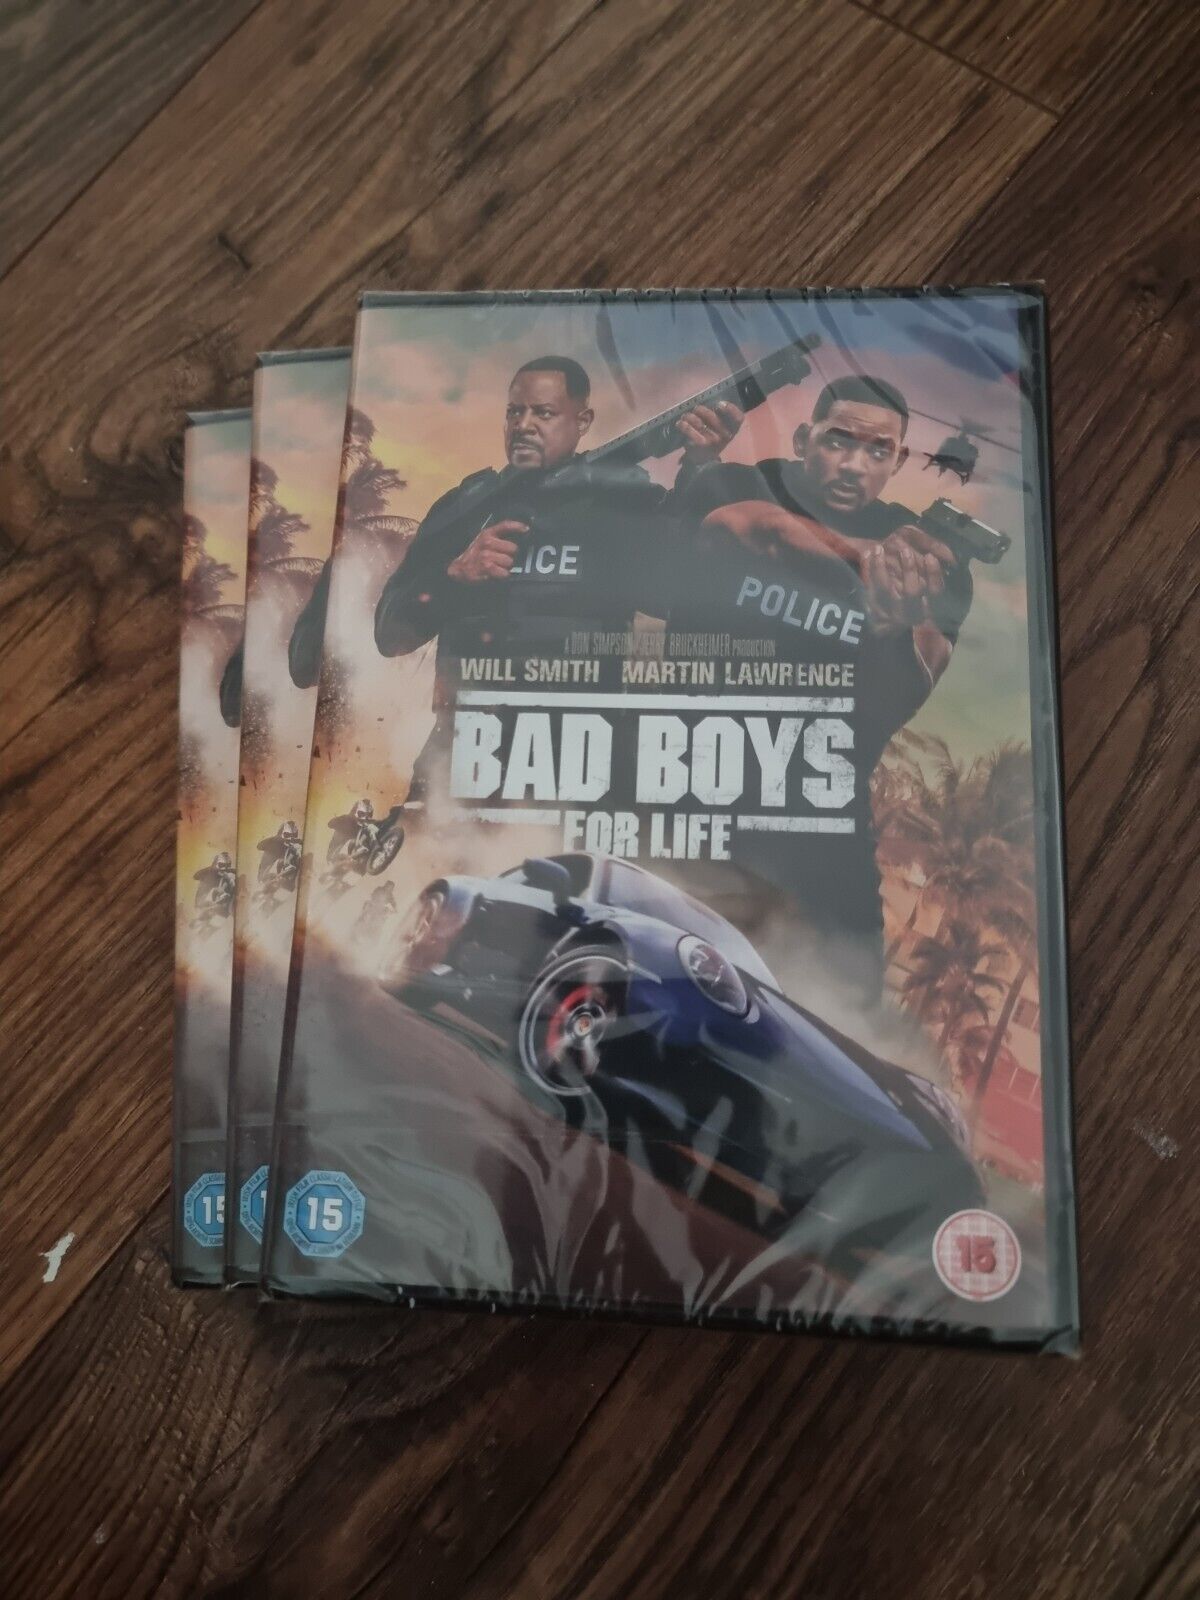 Bad Boys for Life (DVD) Brand New Sealed - Will Smith